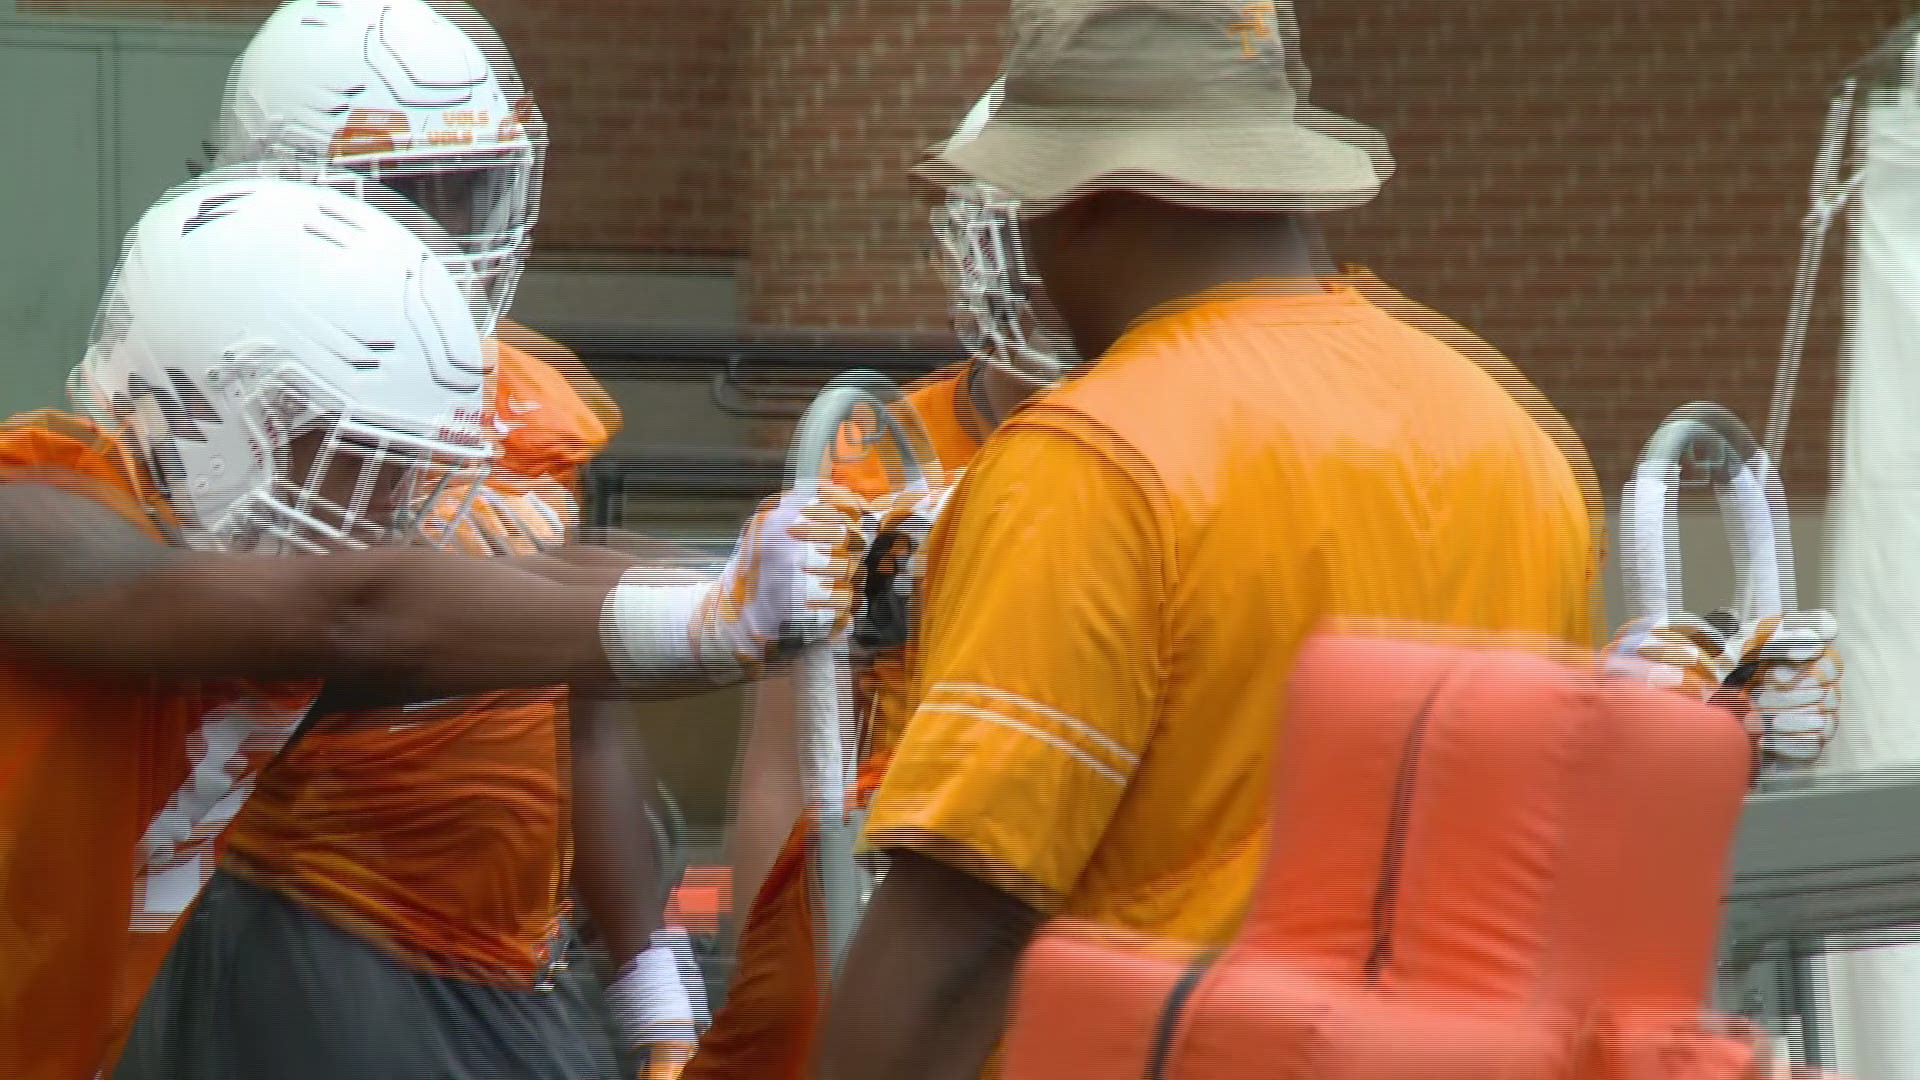 Here's a look at the Vols in the second practice of Fall Camp.